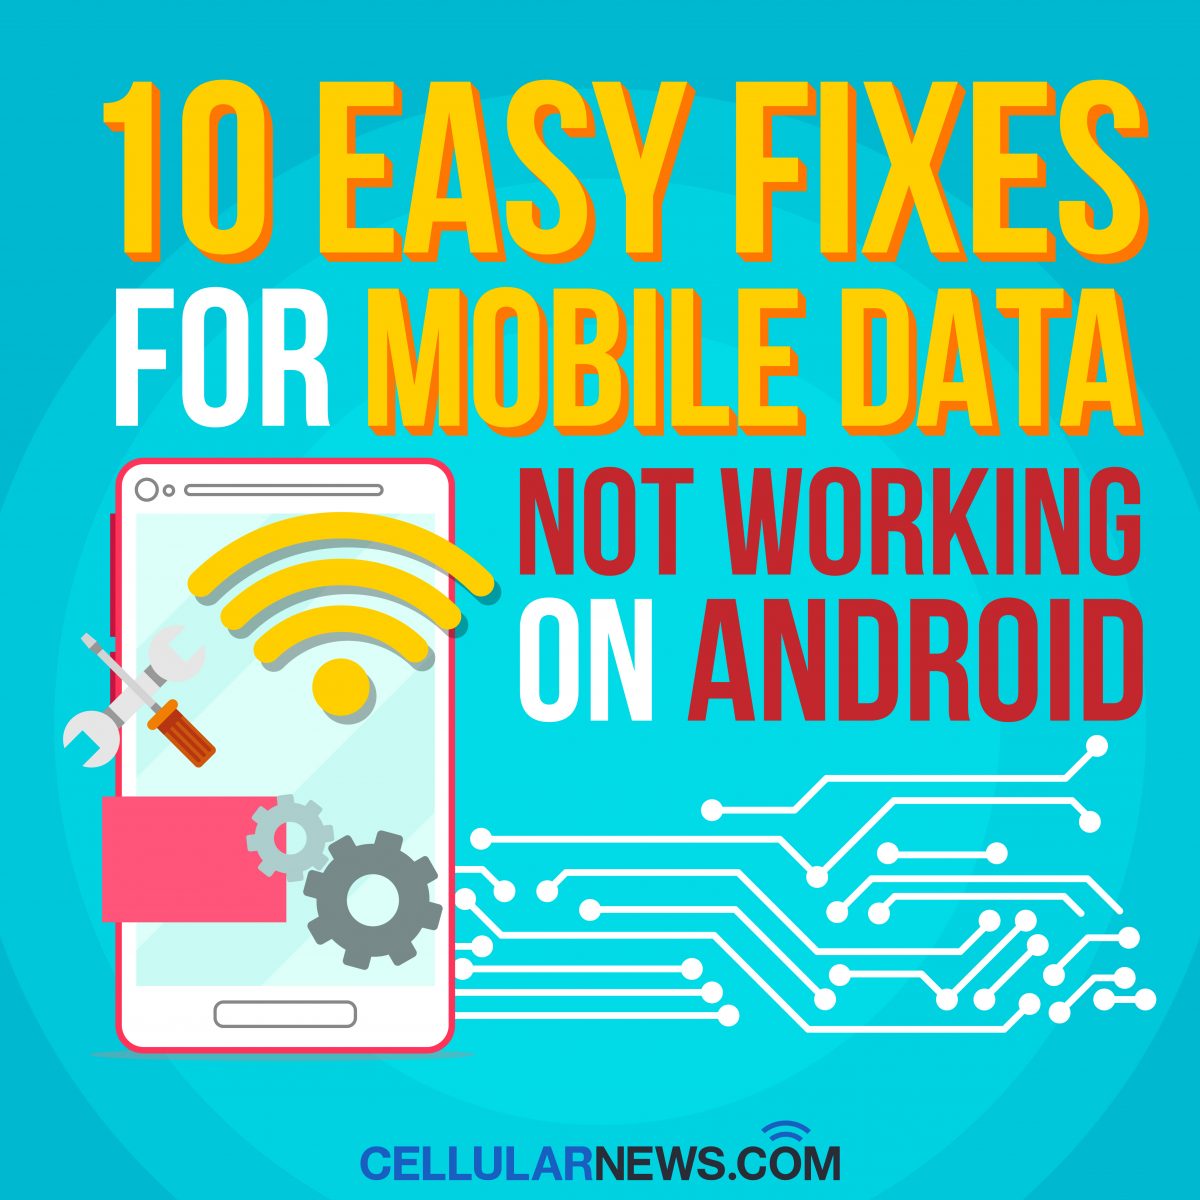 10 Easy Fixes For Mobile Data Not Working On Android